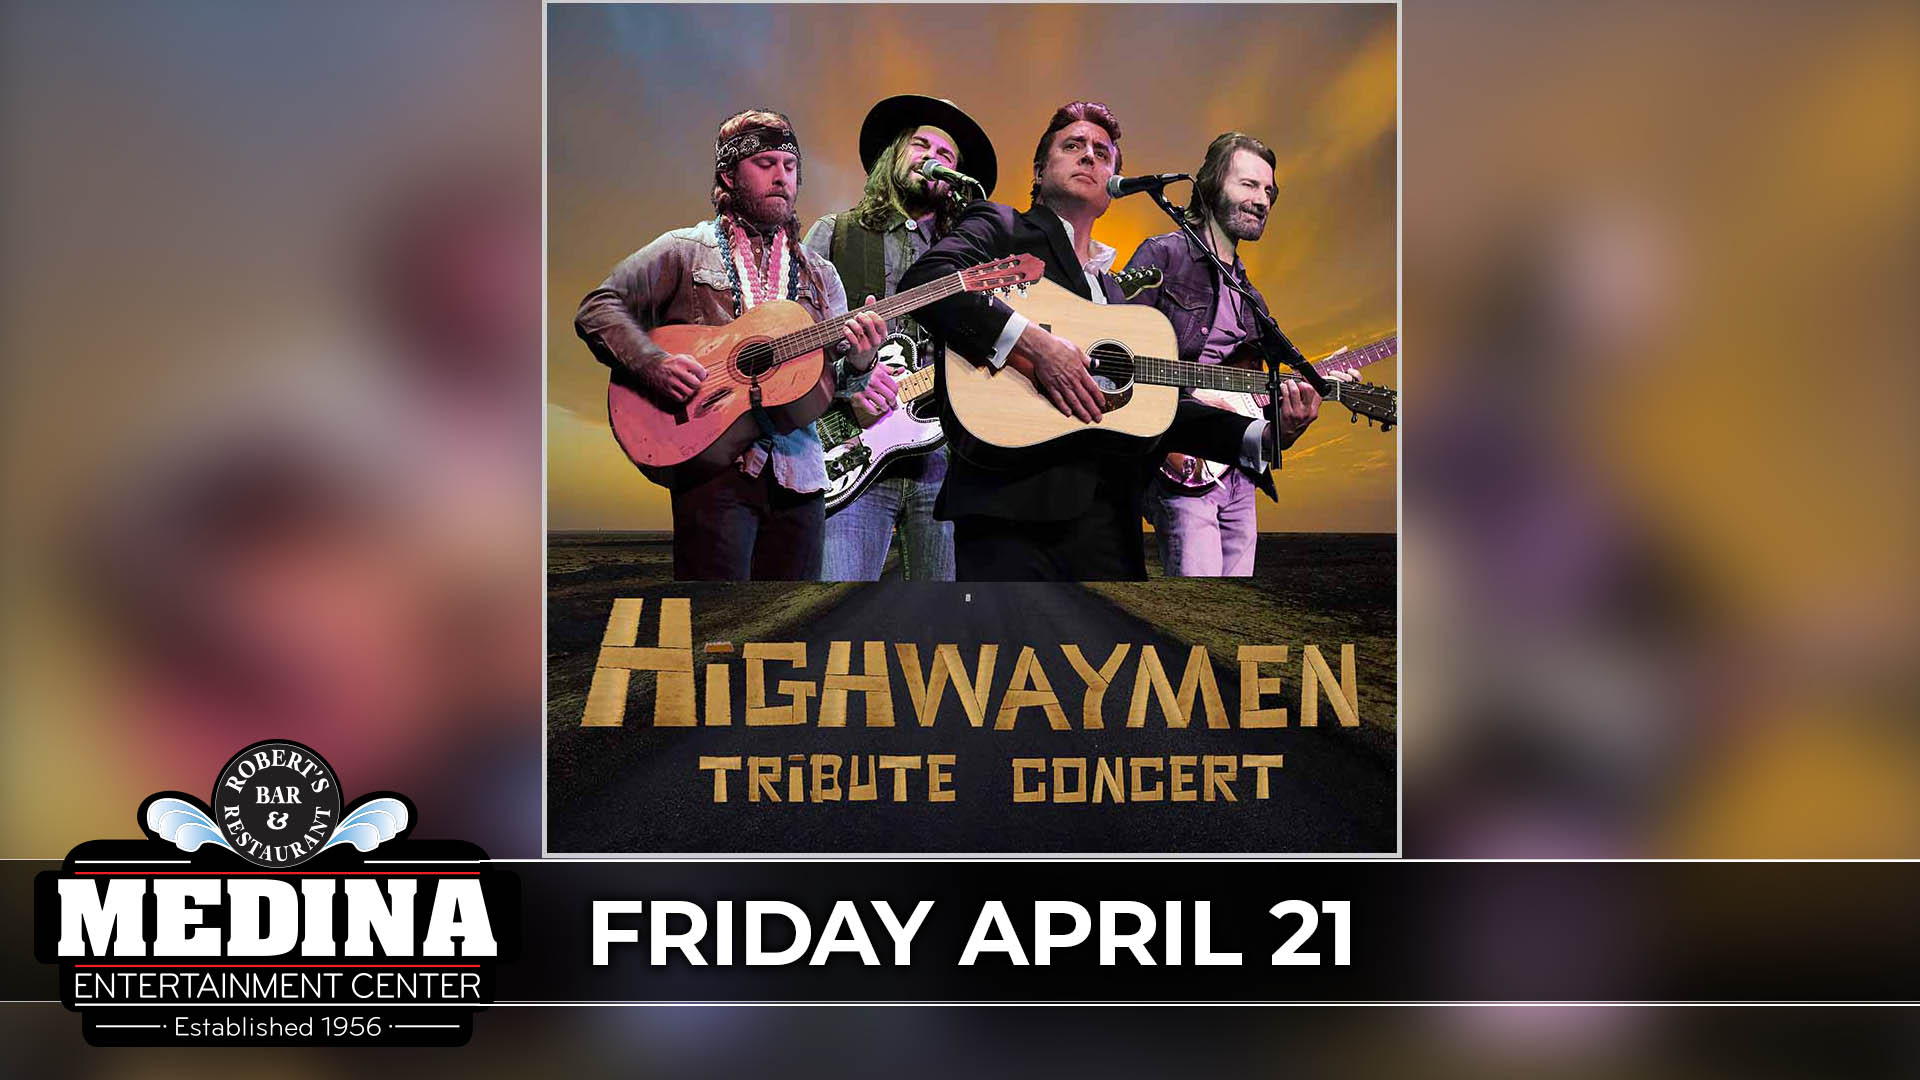 The Highwaymen Show Outlaw Tribute Medina Entertainment Center Friday, April 21st, 2022 Doors: 7:00PM | Music: 8:00PM | 21+ Tickets on-sale Friday, February 3rd at 11AM Ticket Prices: $30.00 (Gold Seating), $25.00 (Silver Seating) & $22.00 (GA Seating) plus applicable fees